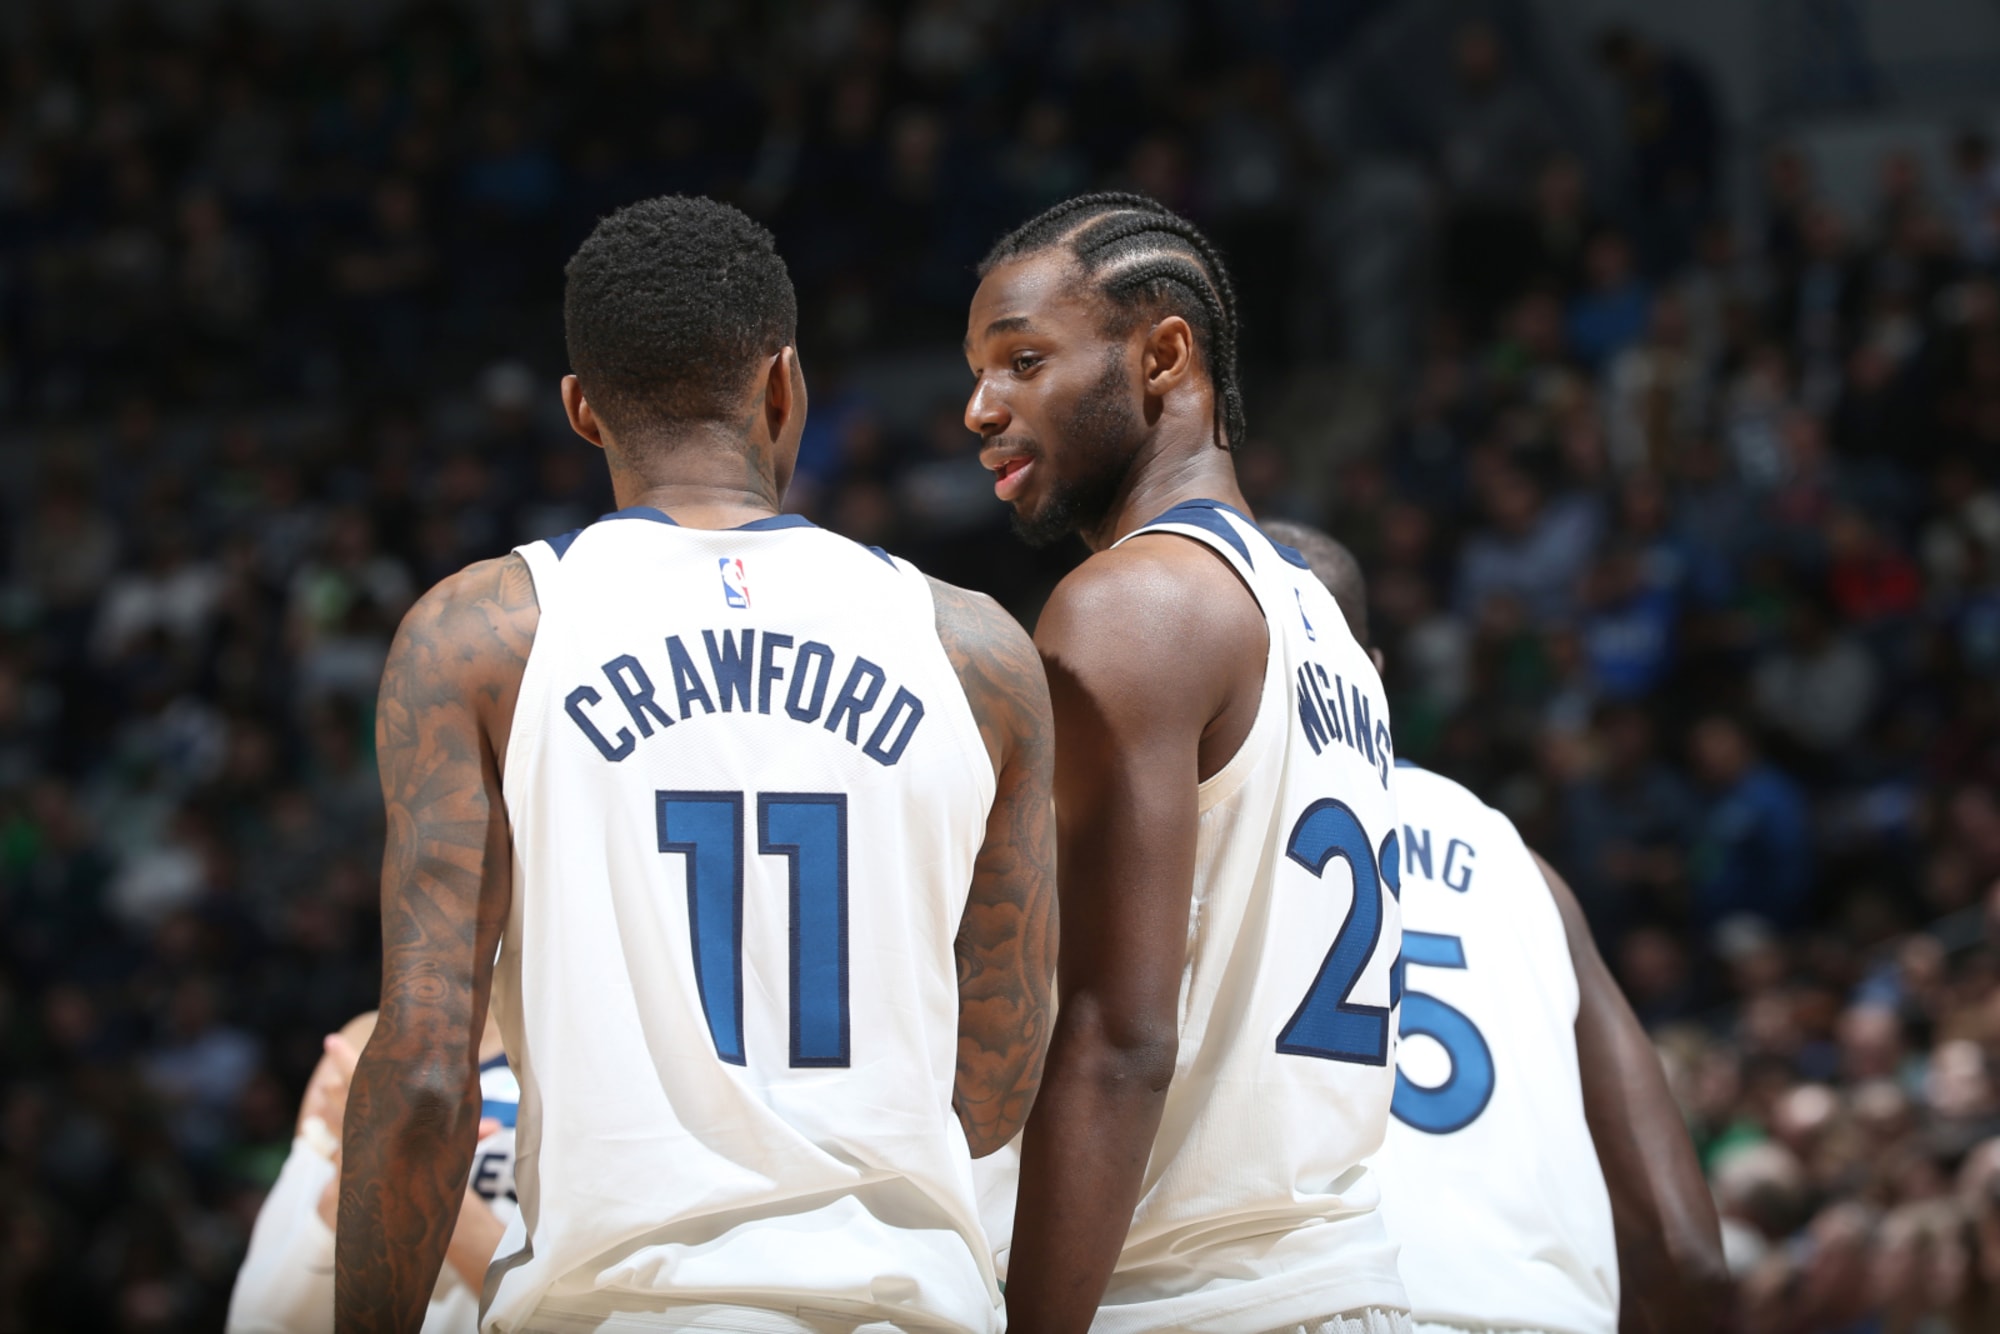 Minnesota Timberwolves: 5 things to know about Jamal Crawford